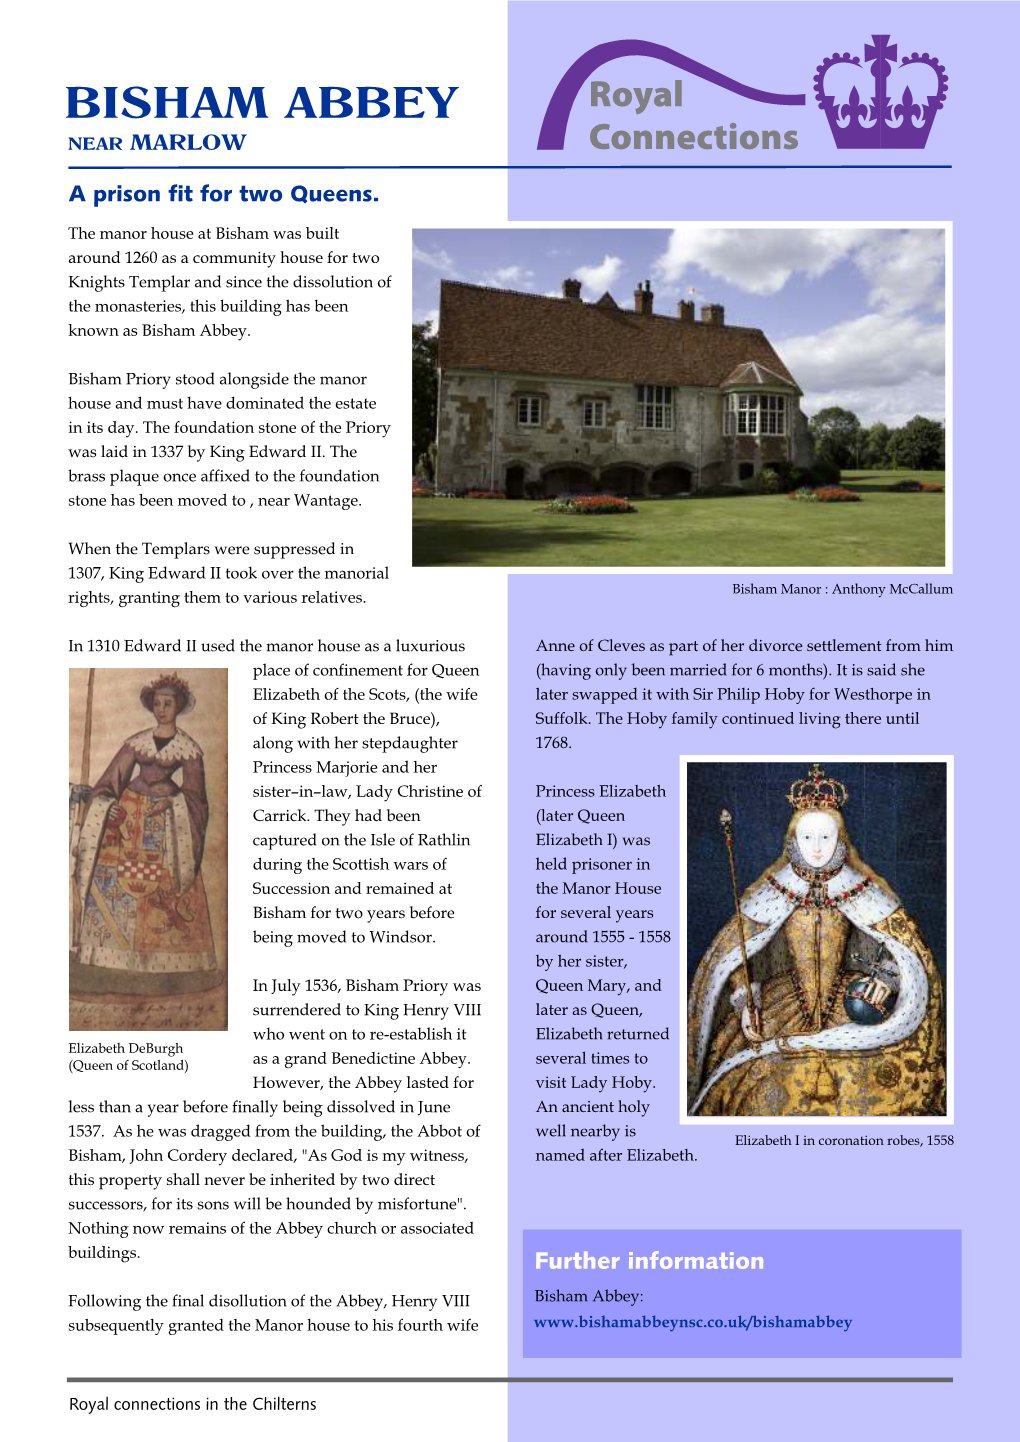 Royal Connections to Bisham Abbey